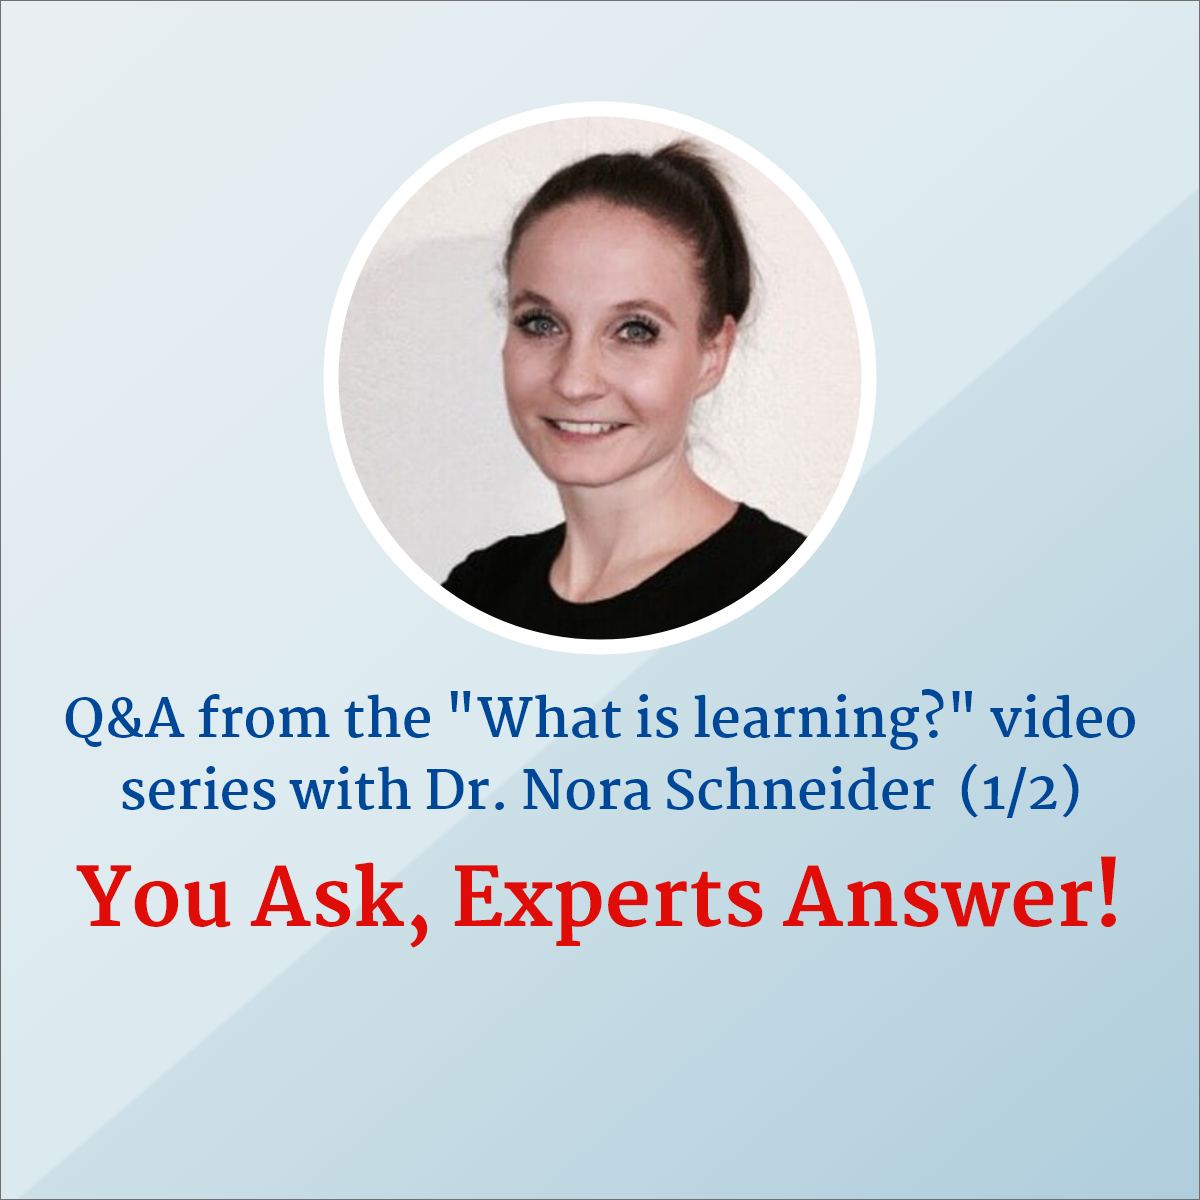 Q&A from the "What is Learning?" video series - Nutrition and Learning Development - Dr. Nora Schneider